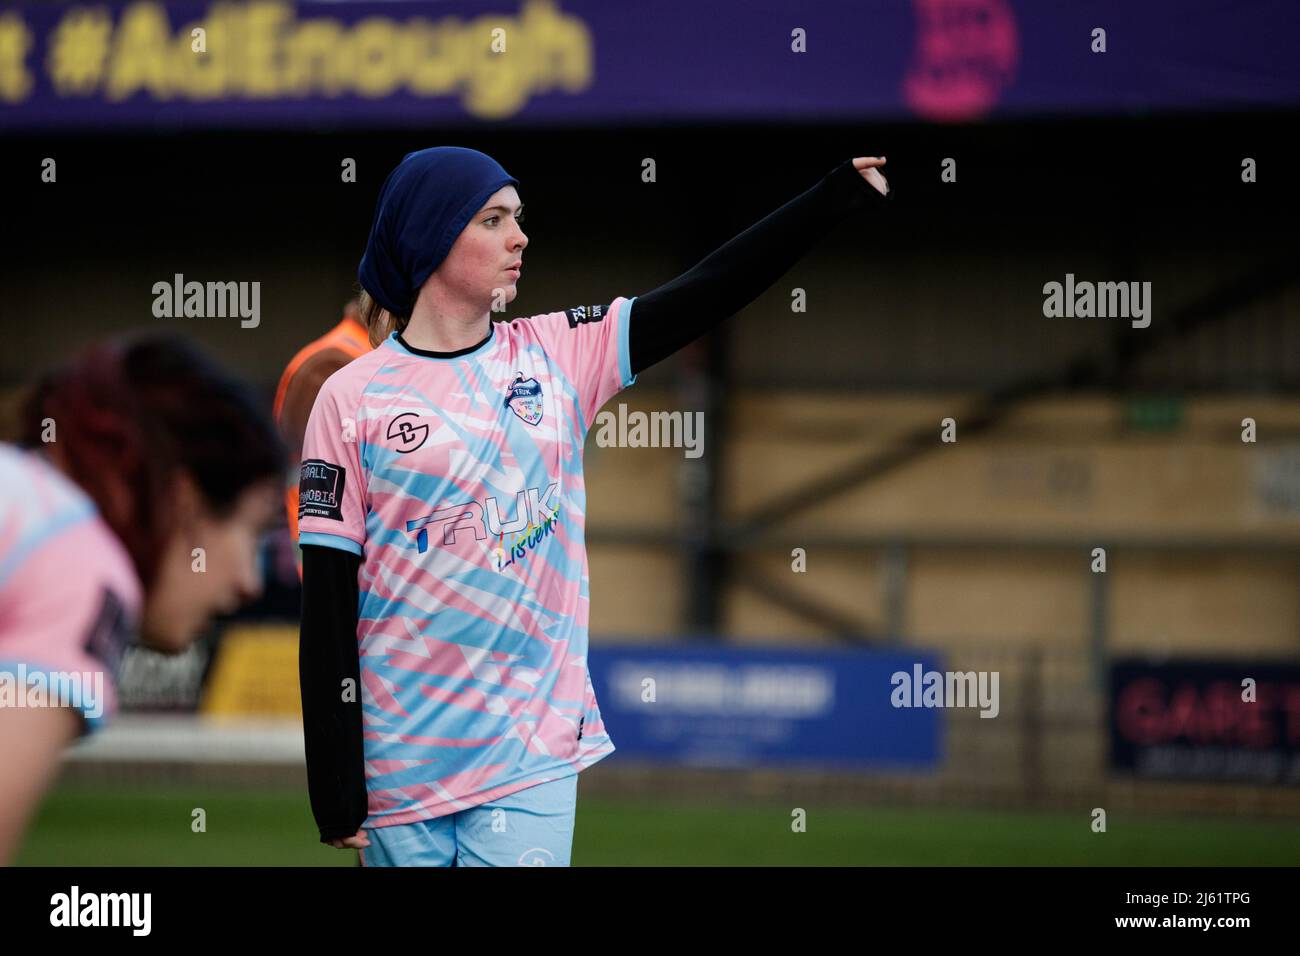 TRUK player at the Football vs Transphobia challenge match between Dulwich Hamlet and Trans Radio UK at Champion Hill in London, England. Stock Photo